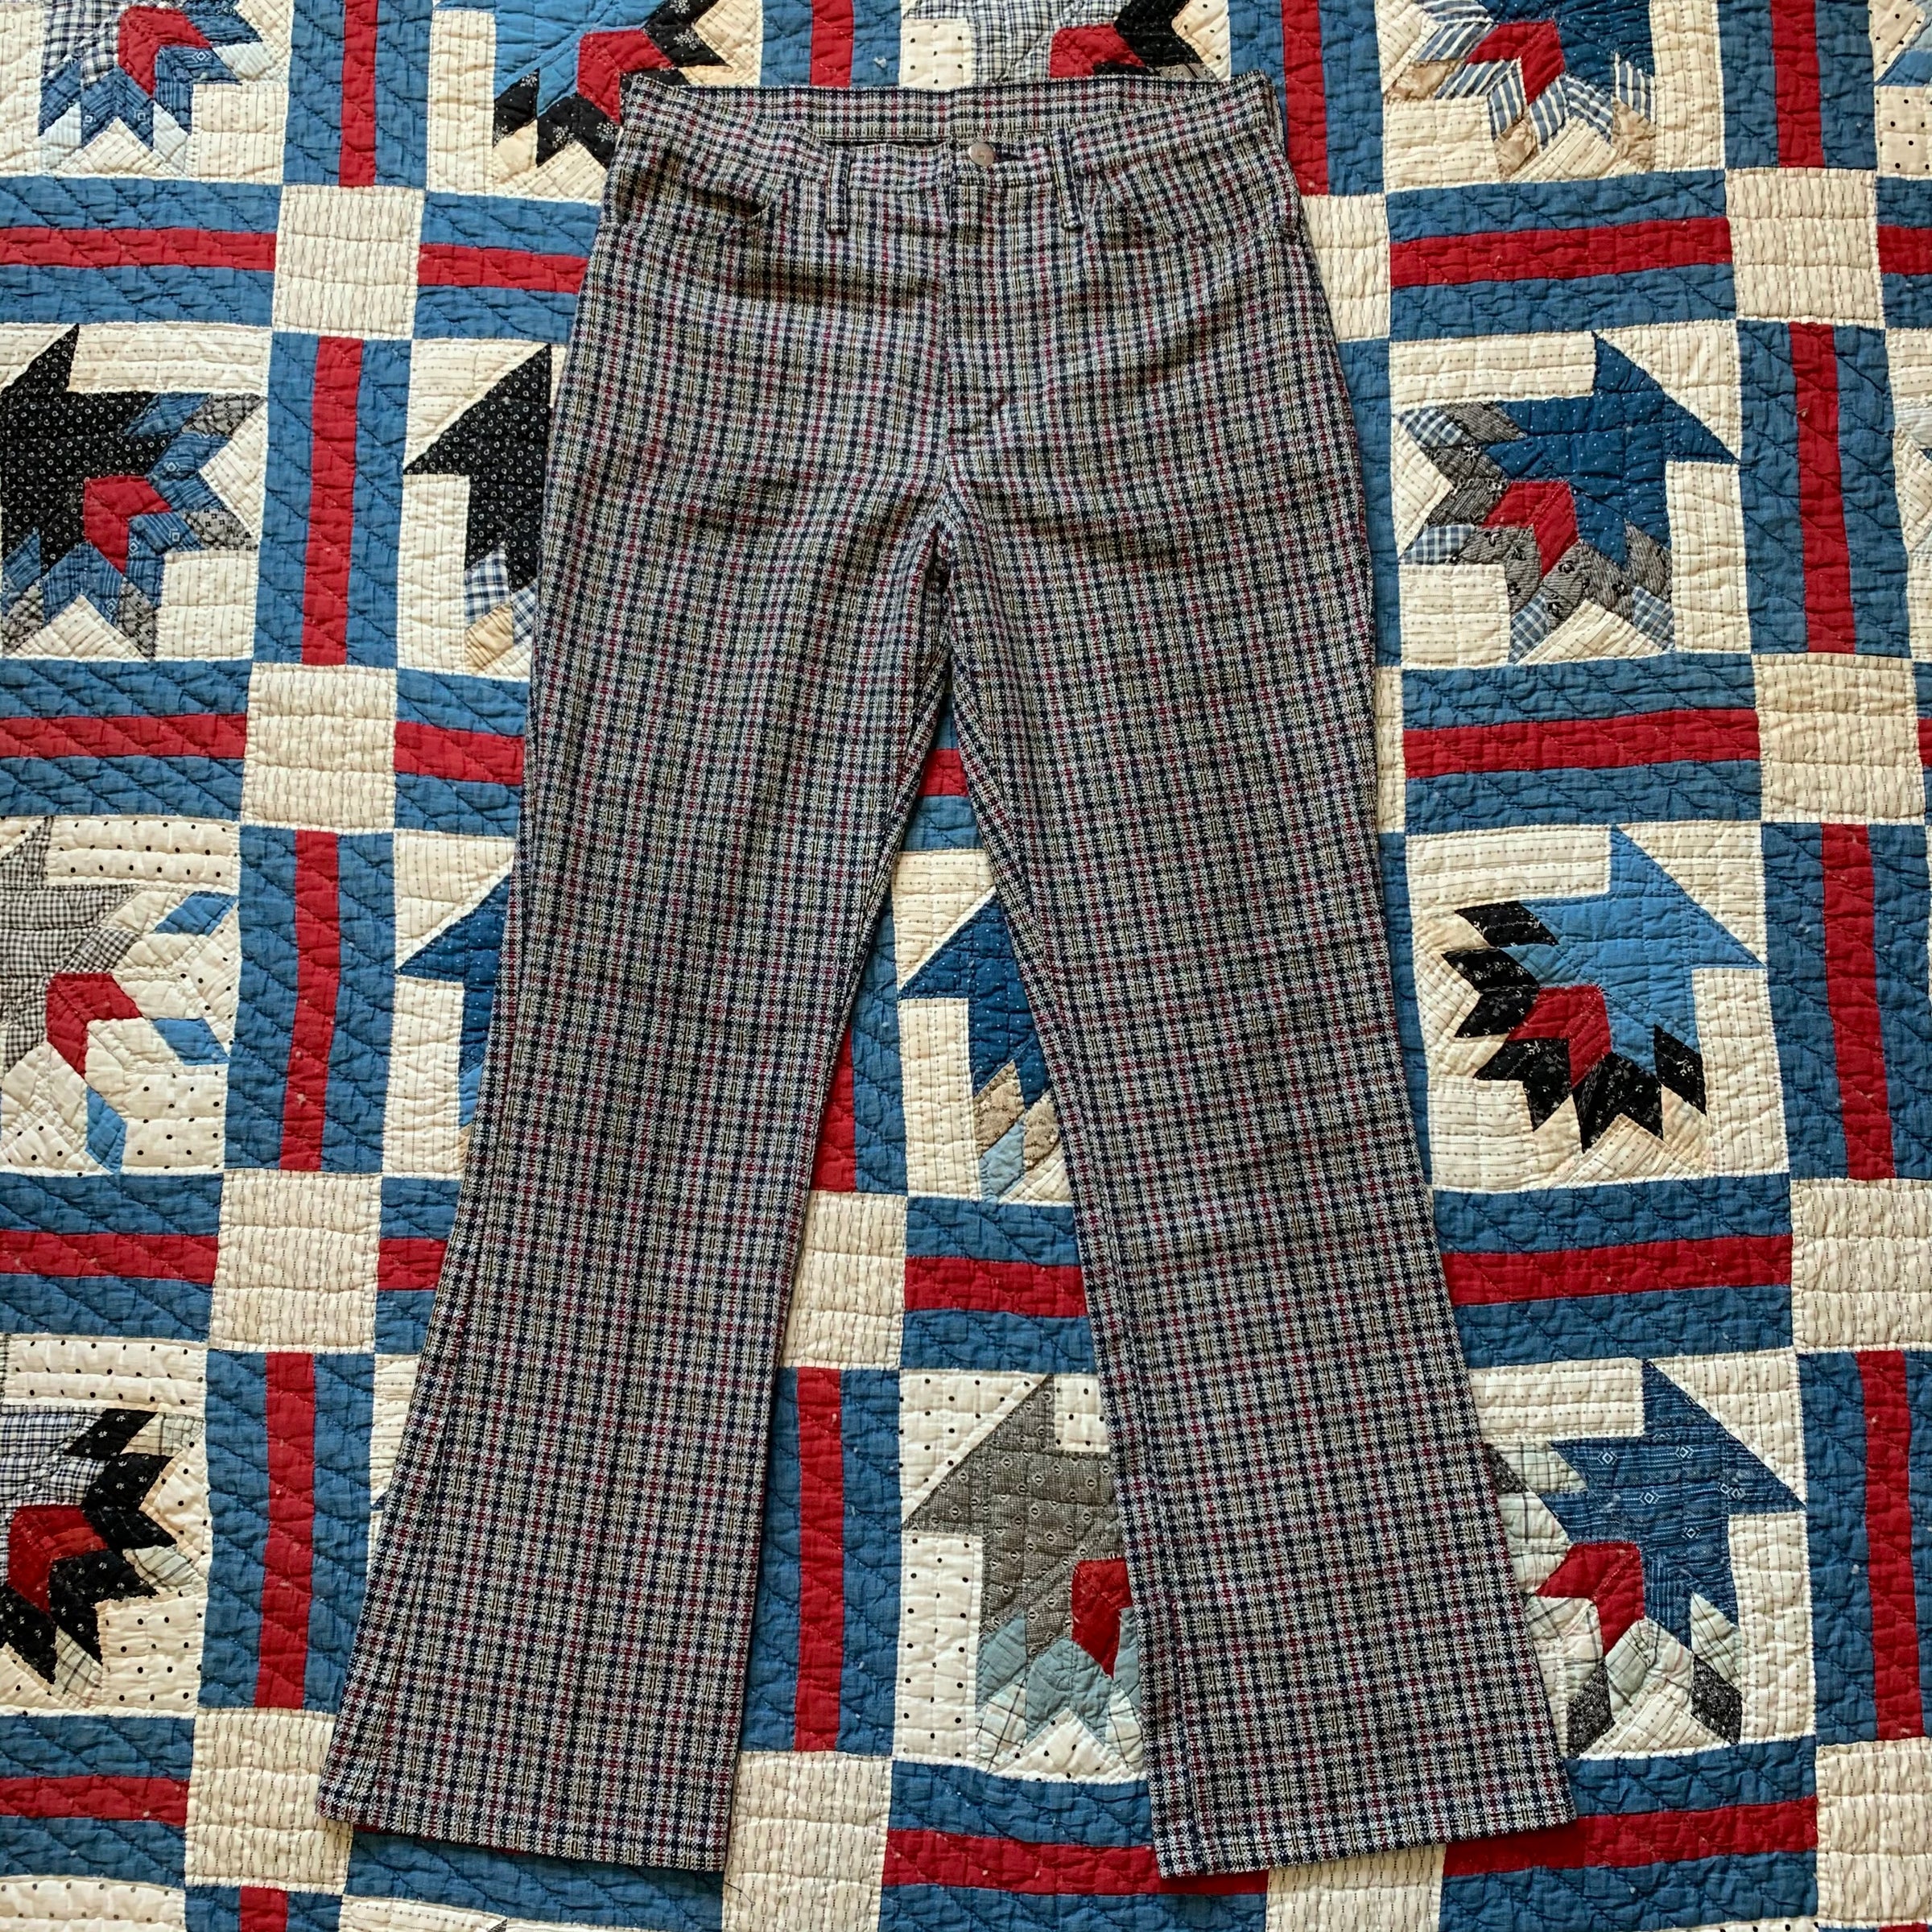 1960's/70's Wrangler Cotton Plaid Flared Trousers 33" x 31"